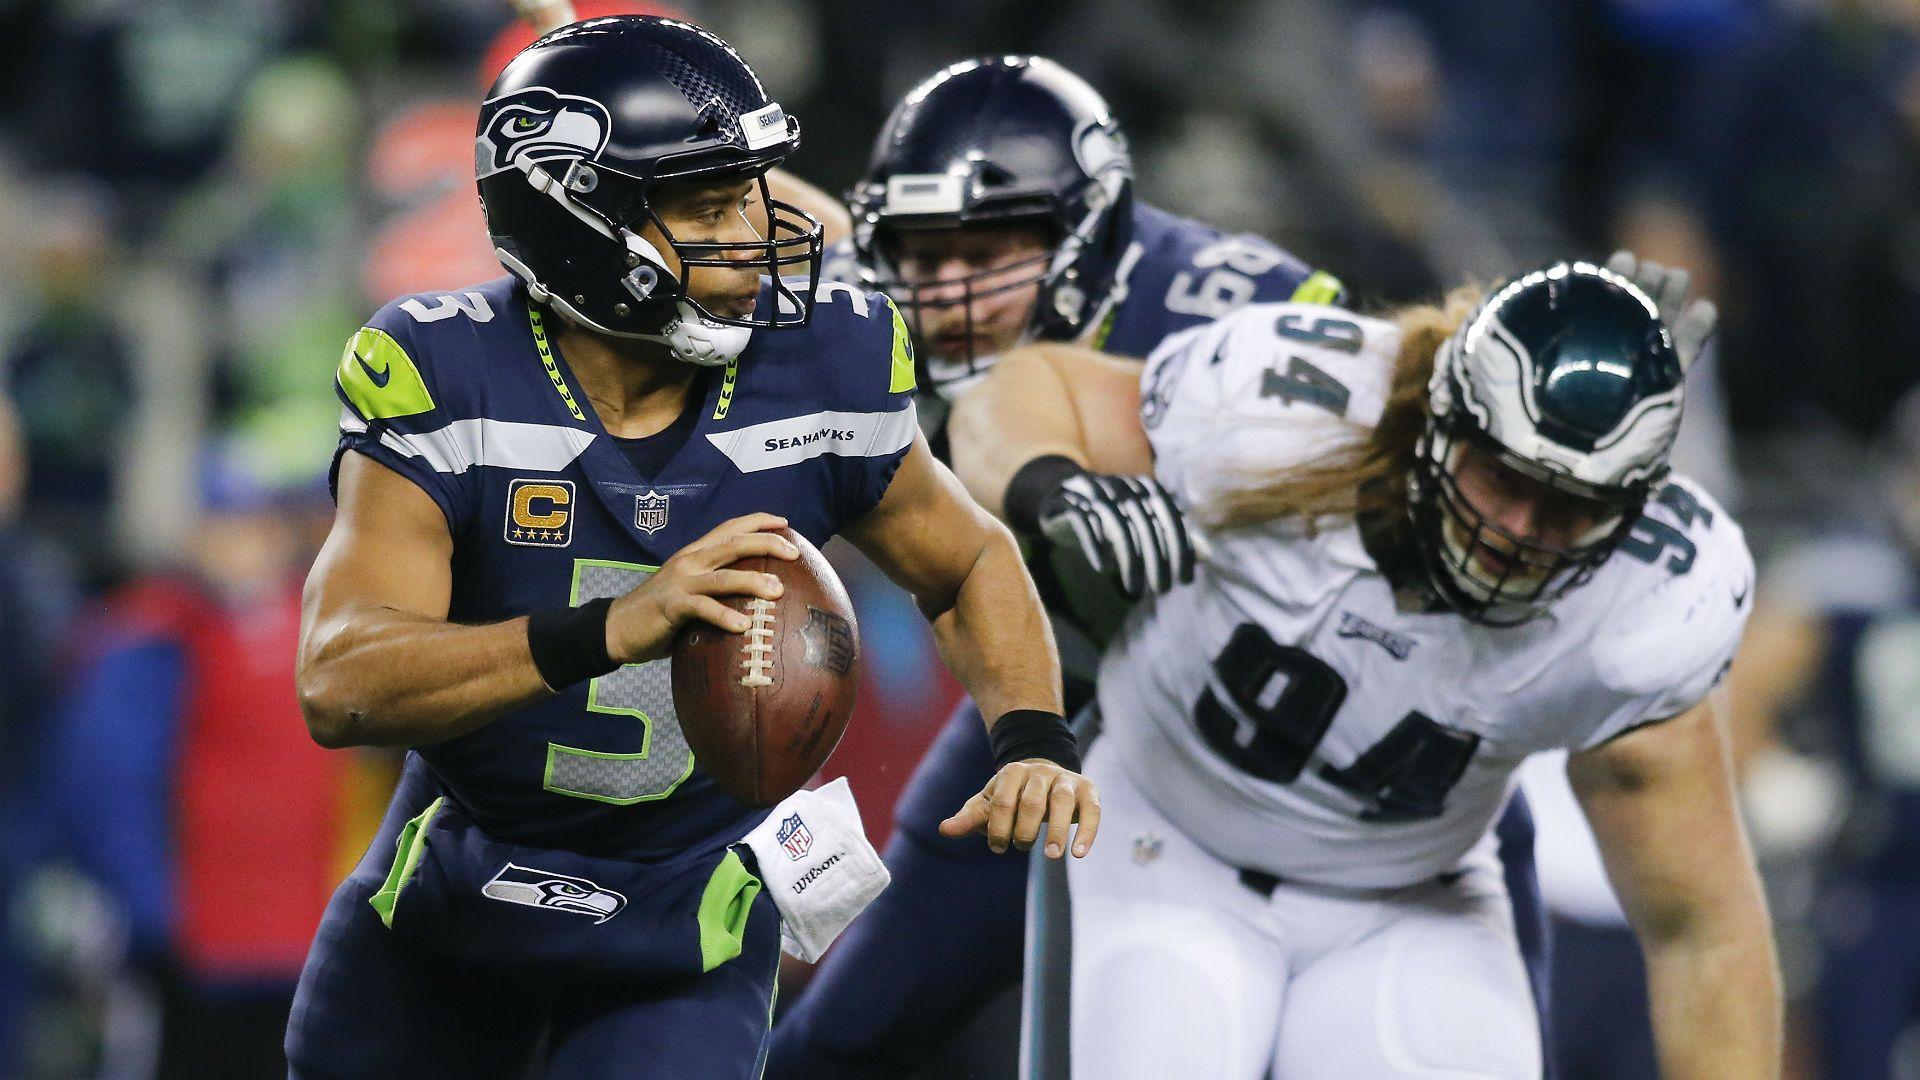 Eagles vs. Seahawks: Score, results, highlights from Sunday night